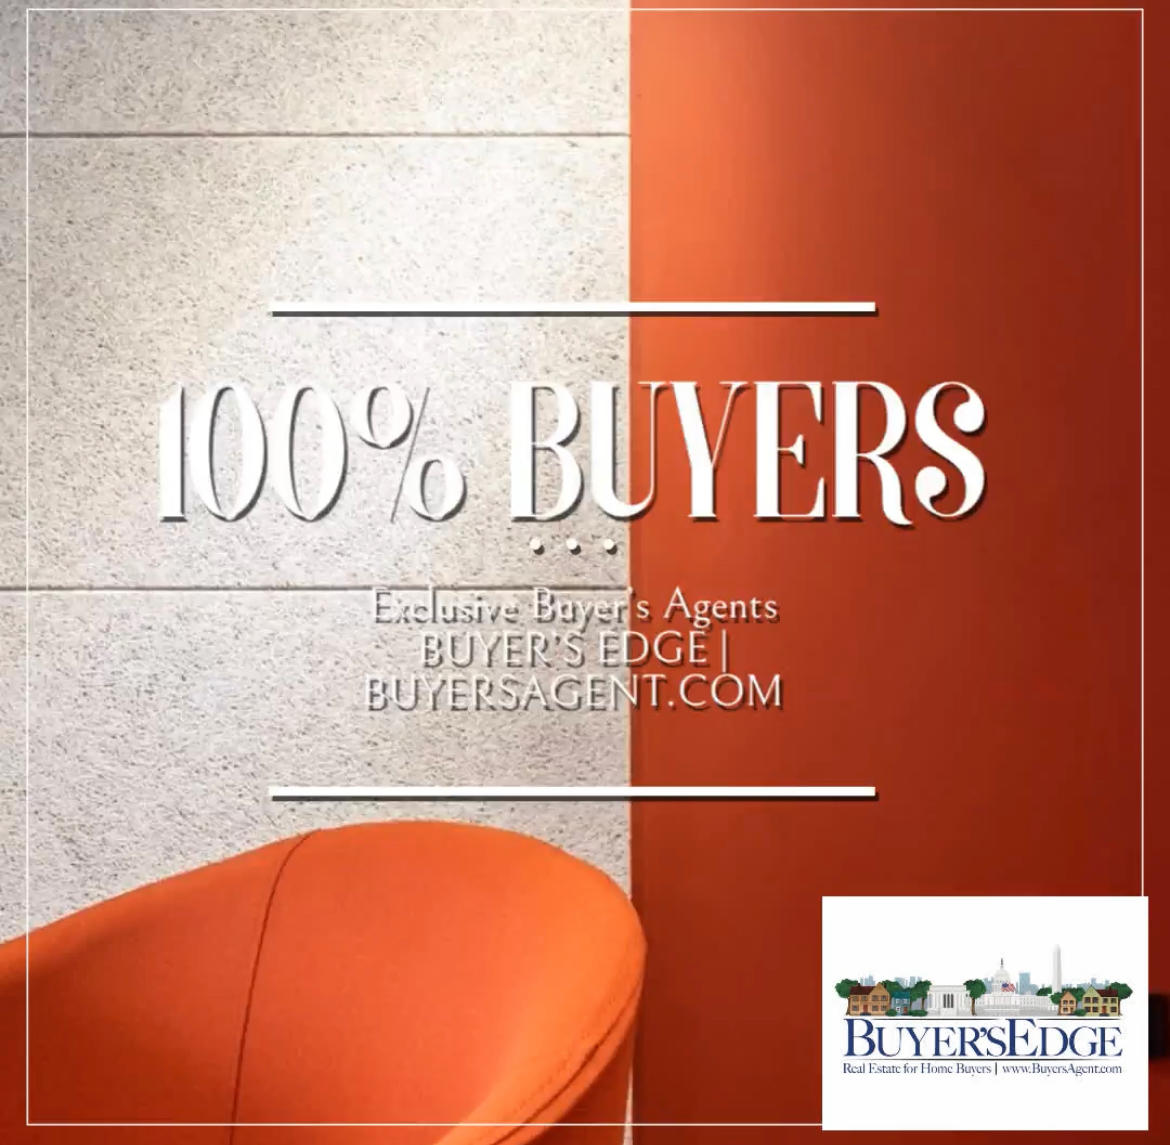 Tips to Help Homebuyers Choose an Expert Buyer’s Agent in the Greater Washington, DC Metro Area